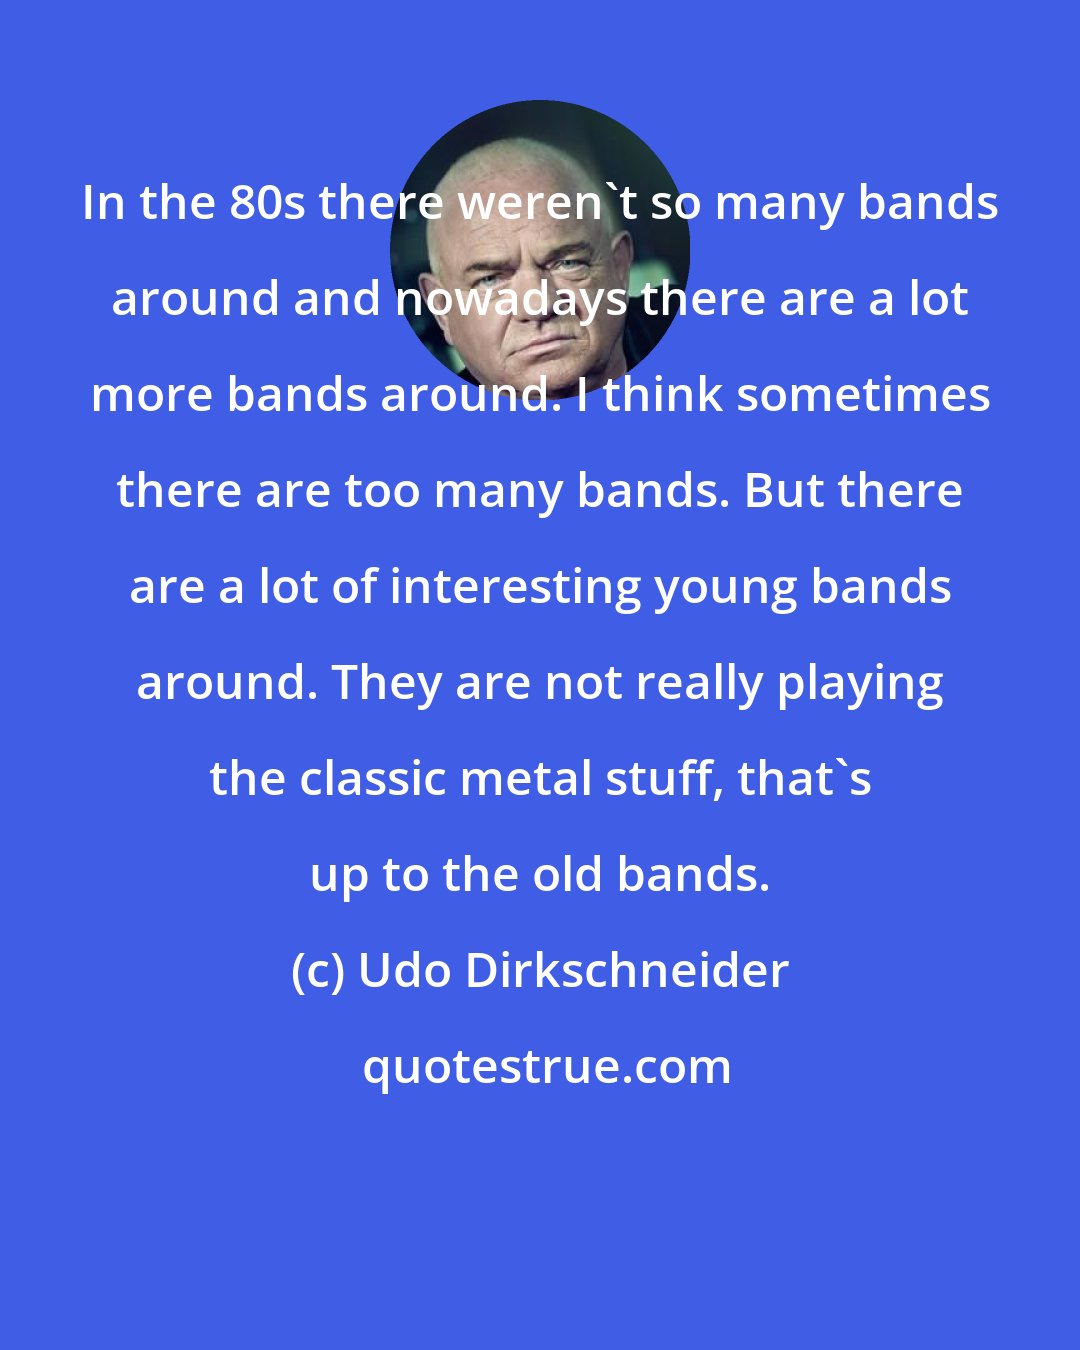 Udo Dirkschneider: In the 80s there weren't so many bands around and nowadays there are a lot more bands around. I think sometimes there are too many bands. But there are a lot of interesting young bands around. They are not really playing the classic metal stuff, that's up to the old bands.